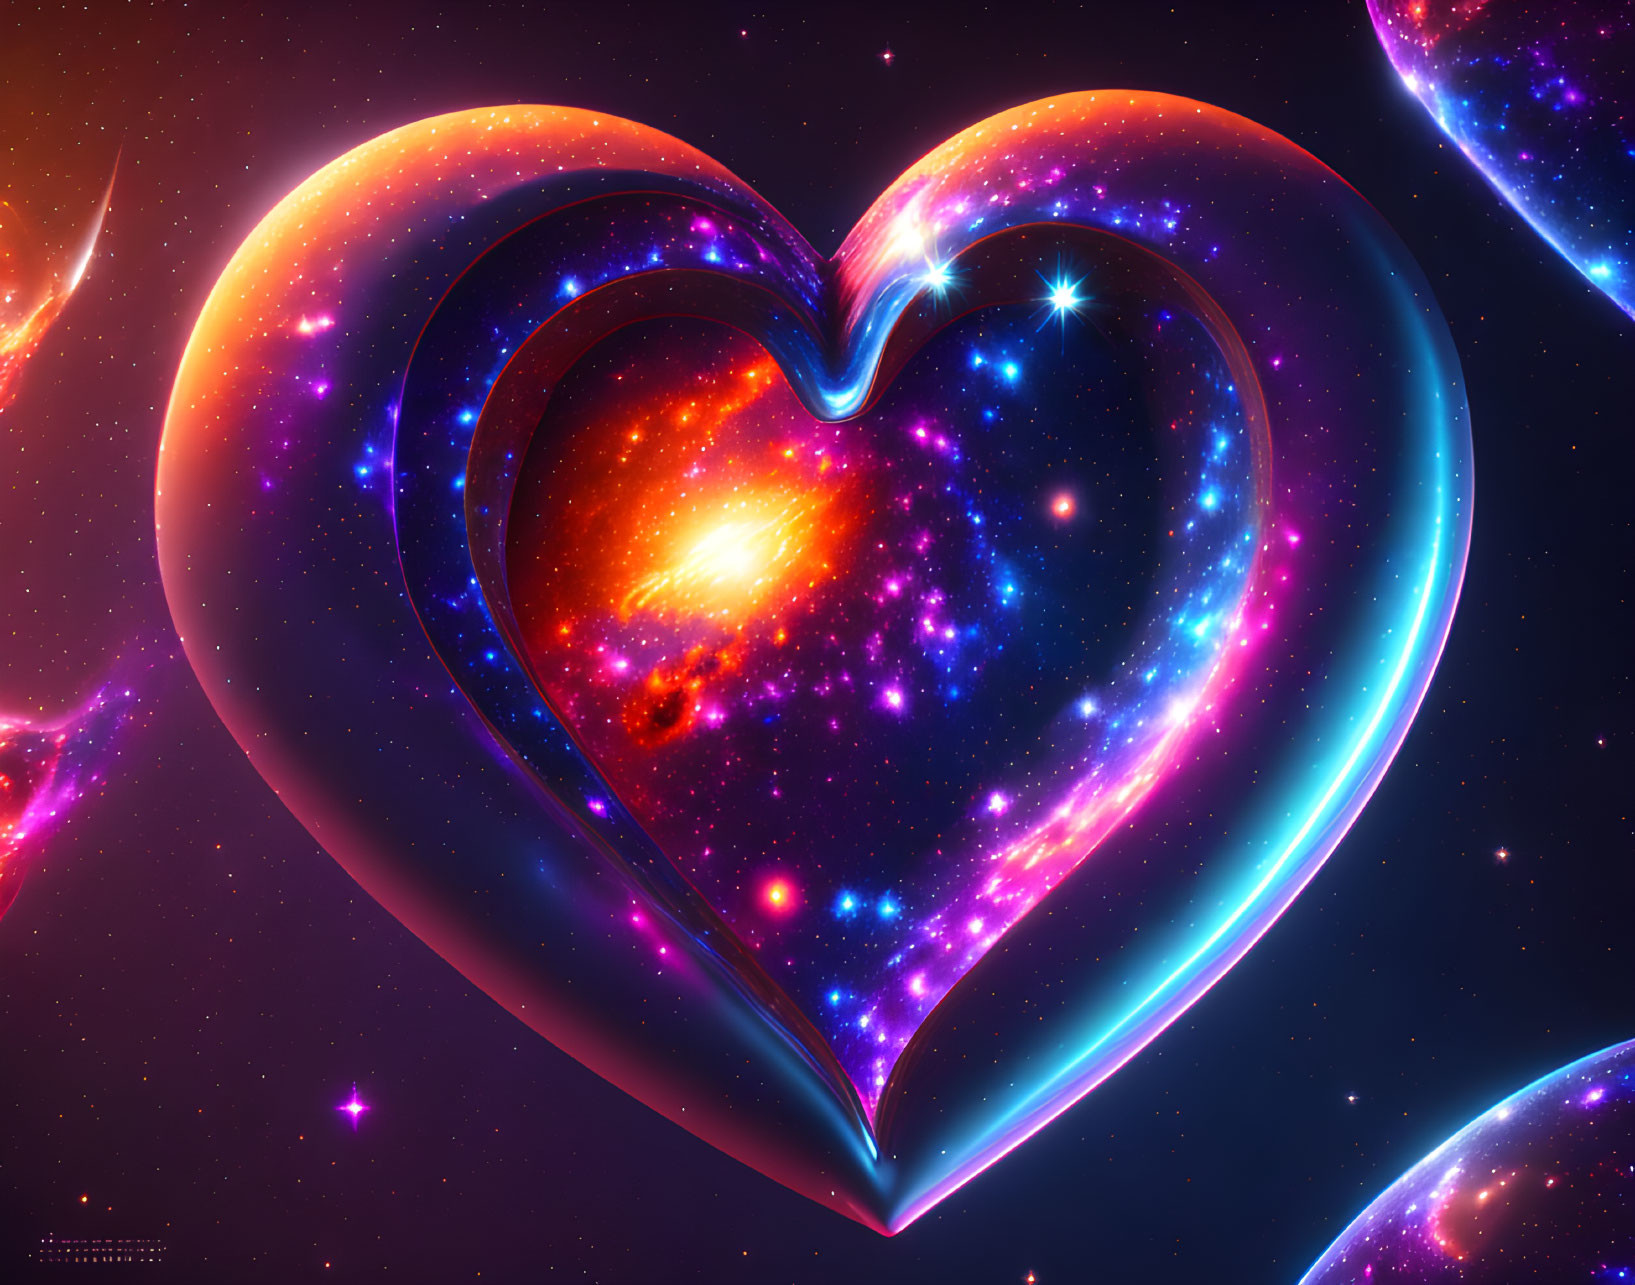 Colorful Cosmic Heart-Shaped Digital Artwork with Galaxies and Stars